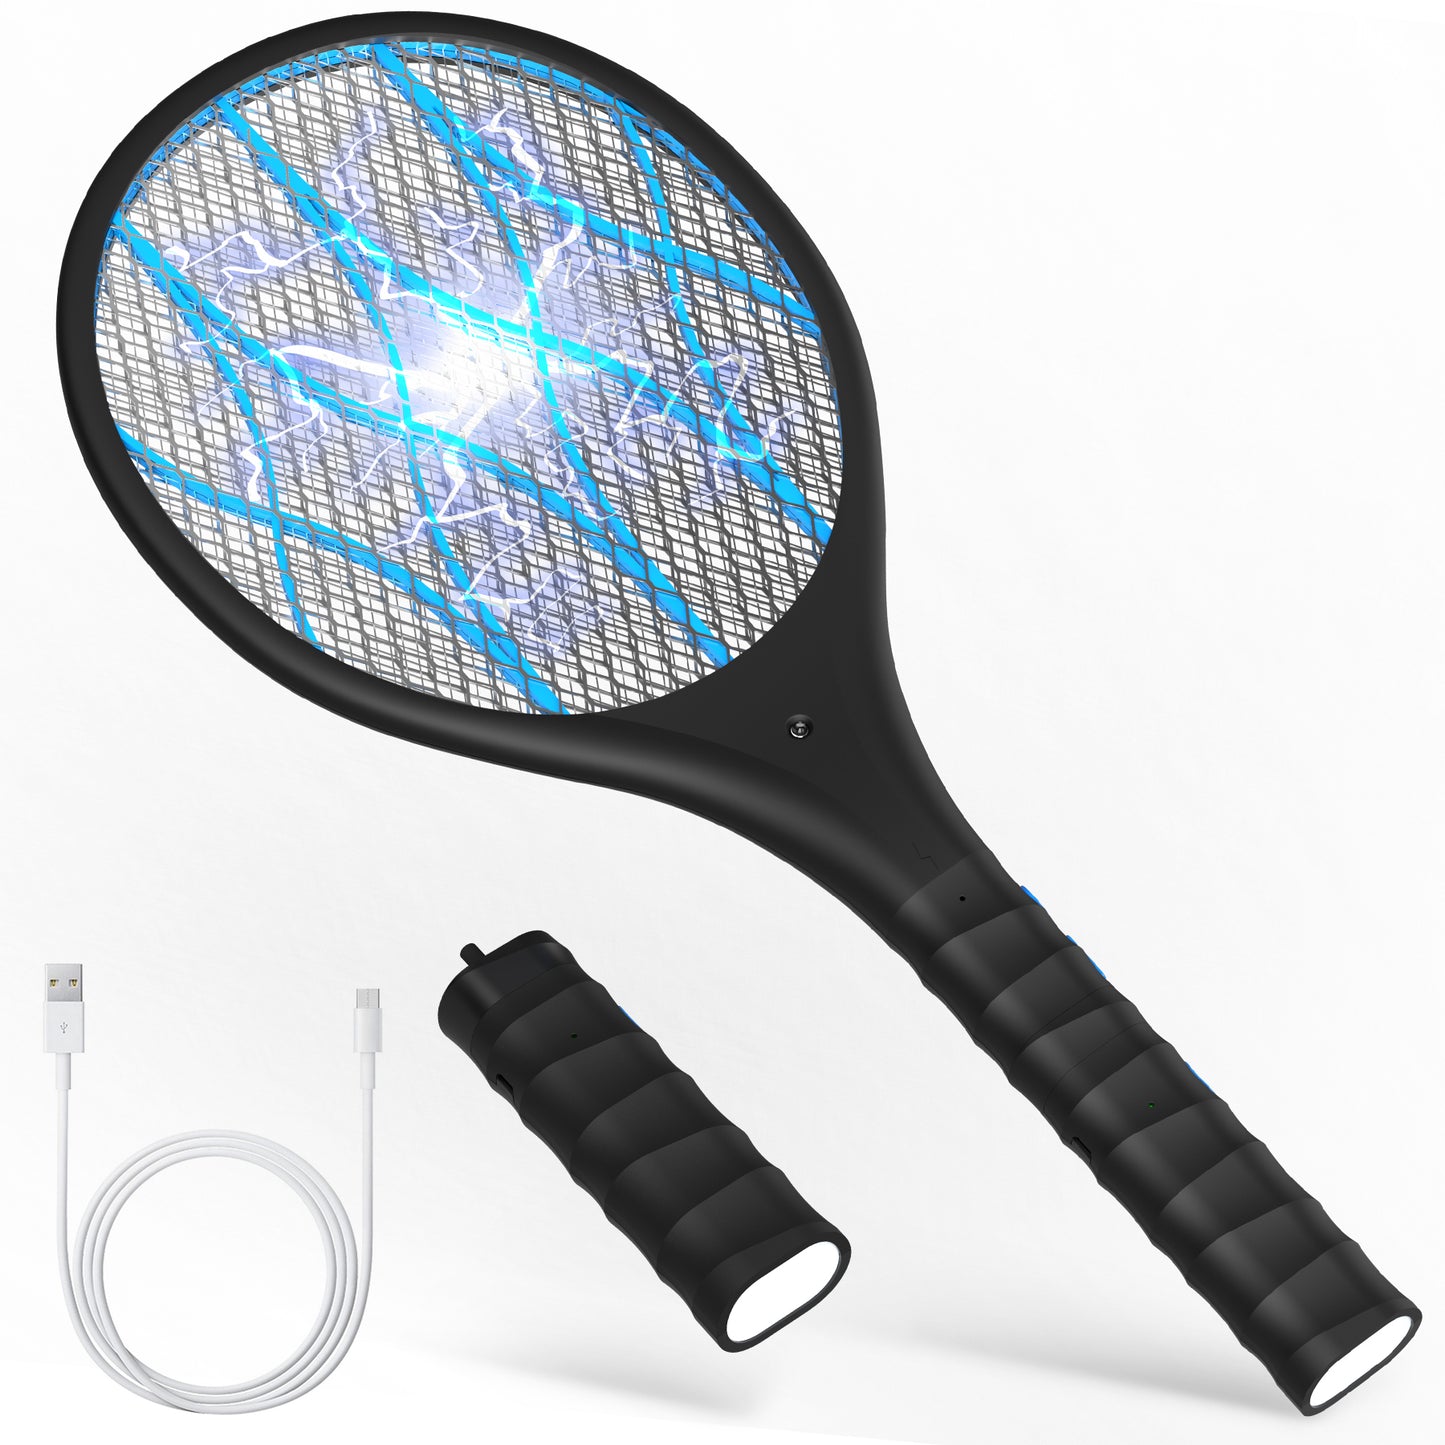 ALROCKET Intelabe Bug Zapper, Mosquito Killer USB Rechargeable Electric Fly Swatter for Home, Outdoor